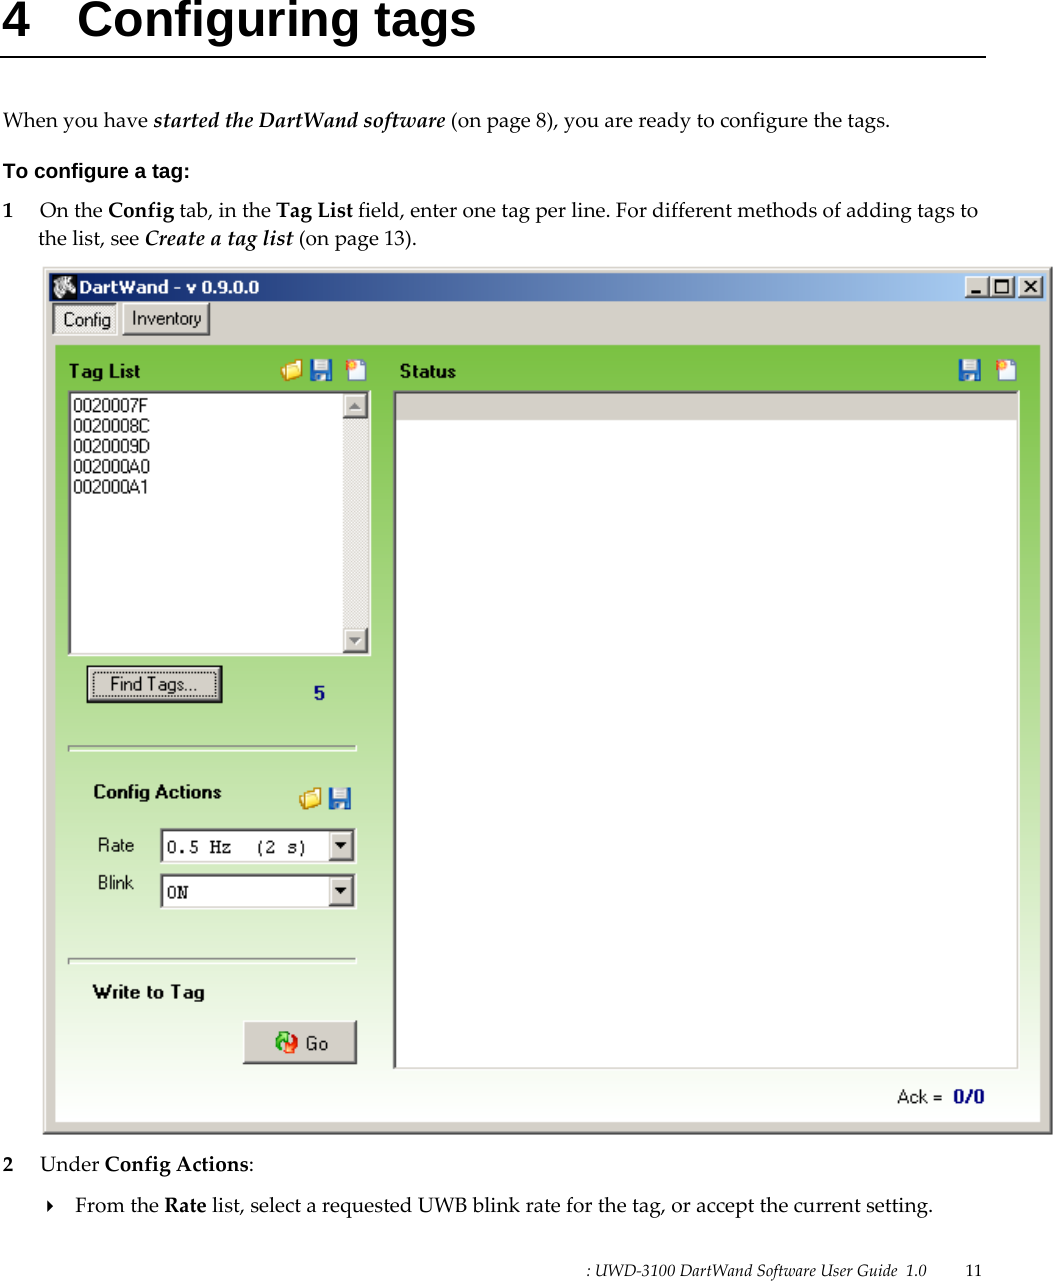 : UWD-3100 DartWand Software User Guide  1.0   11   4 Configuring tags When you have started the DartWand software (on page 8), you are ready to configure the tags. To configure a tag: 1 On the Config tab, in the Tag List field, enter one tag per line. For different methods of adding tags to the list, see Create a tag list (on page 13).  2 Under Config Actions:  From the Rate list, select a requested UWB blink rate for the tag, or accept the current setting. 